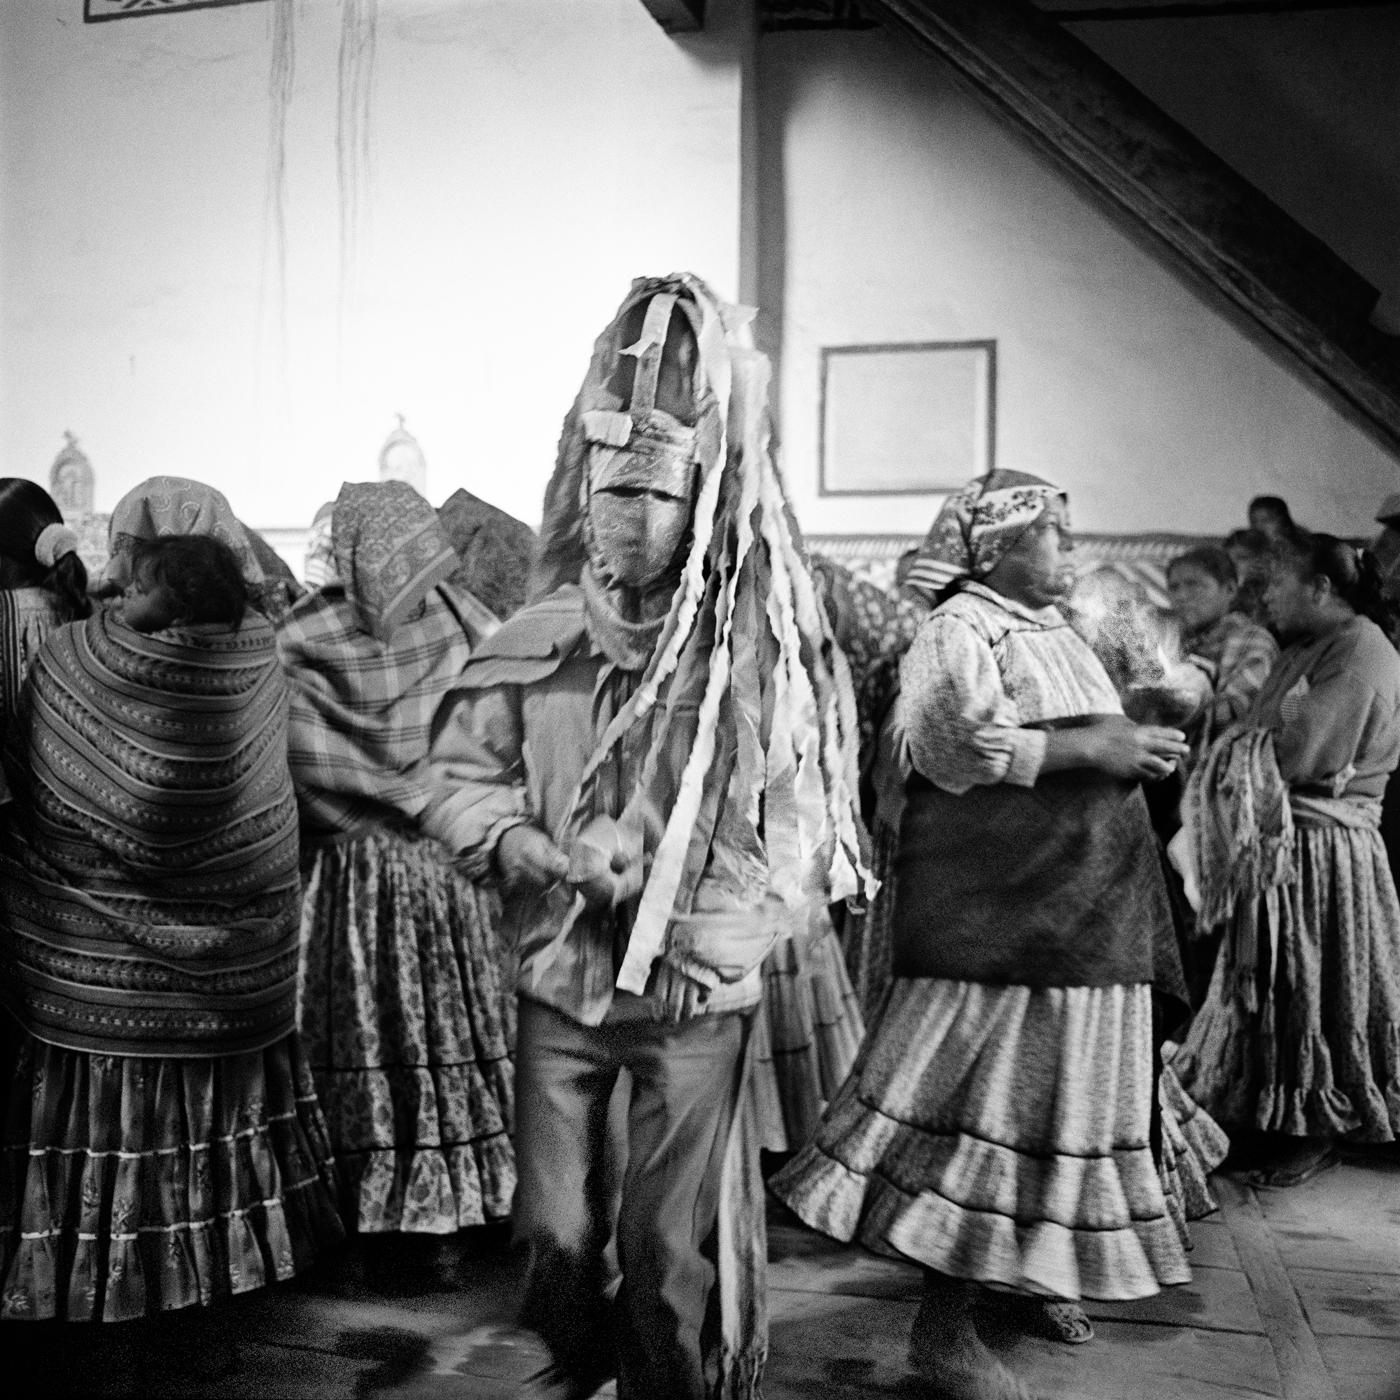 Running the Standstill - A Matachin dancer during the dance celebrated on the day...